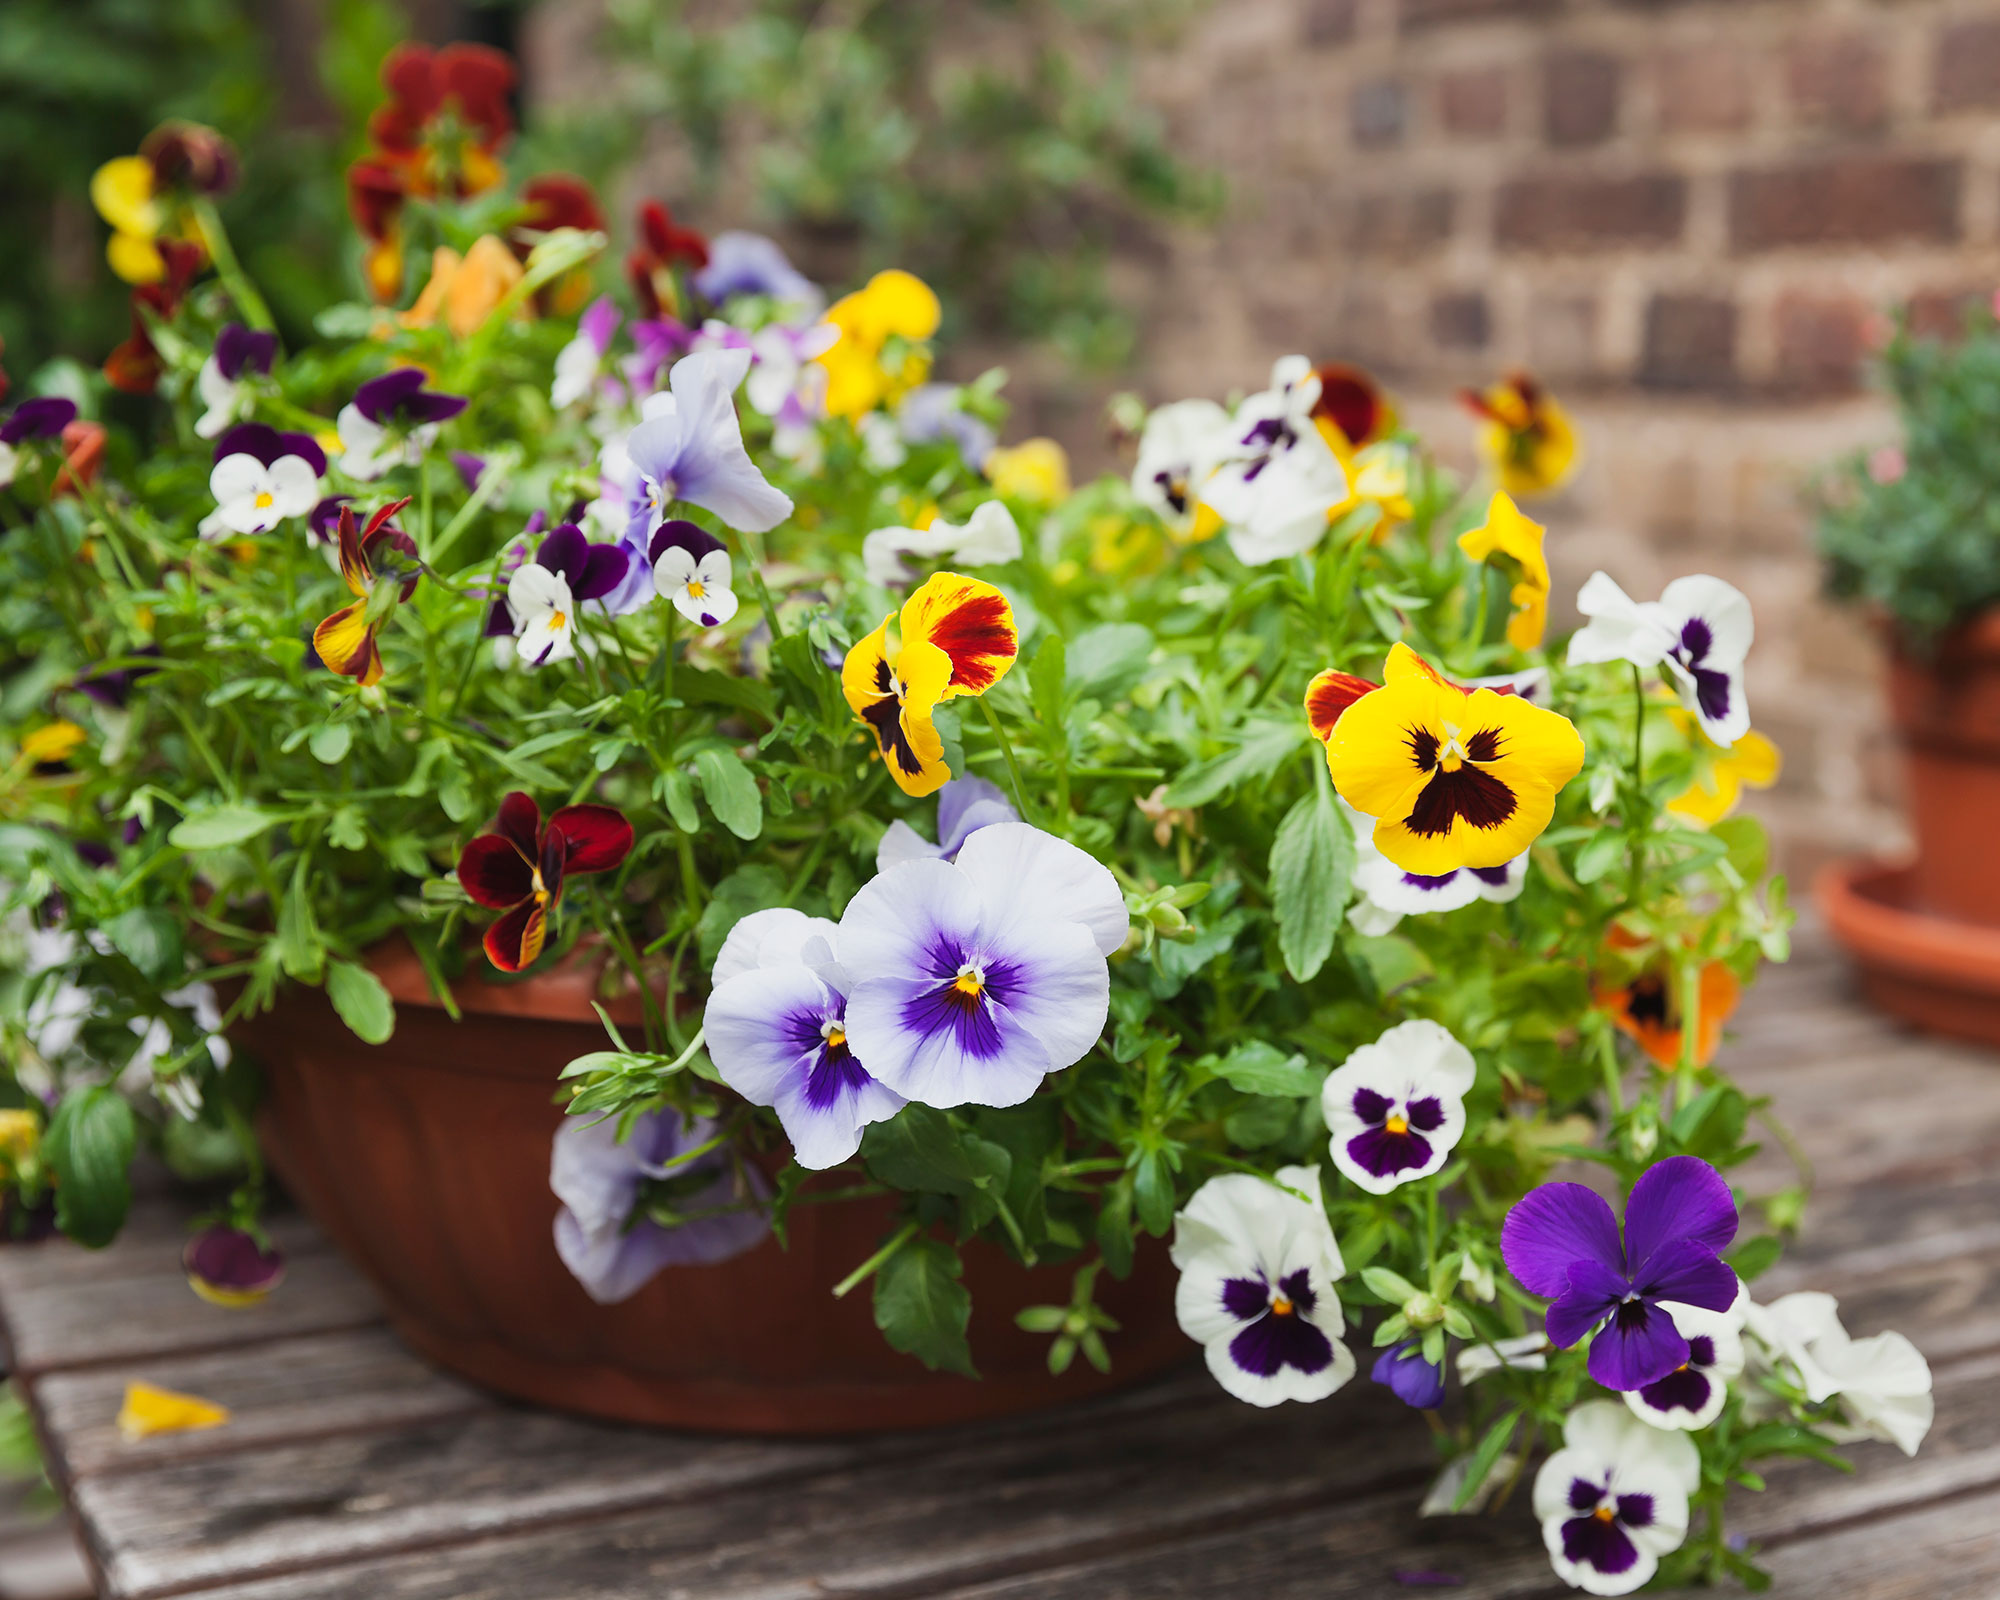 For Your Balcony Garden, Here Are 7 Pretty Blooming Flowers. - Buzz News